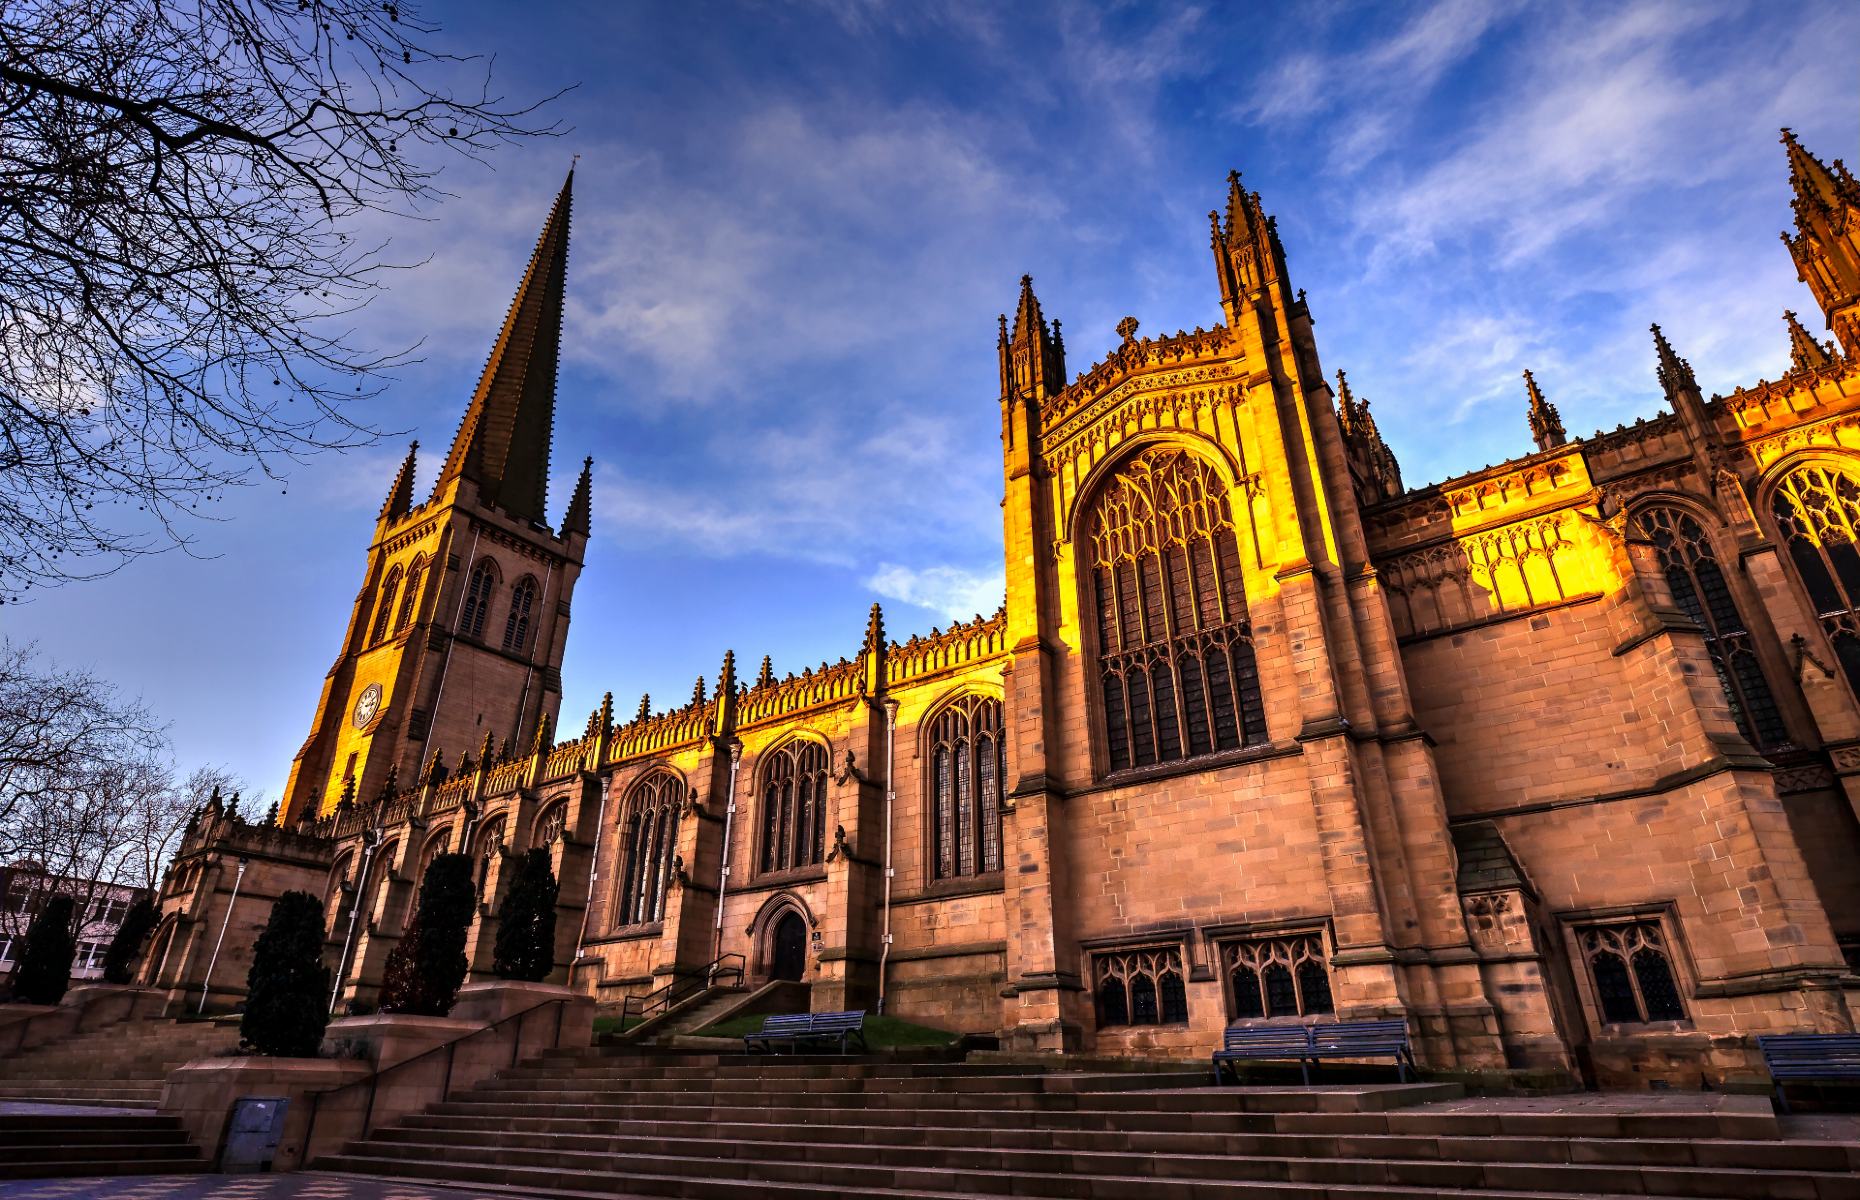 Wakefield Cathedral (Image: Andrzej Sowa/Shutterstock)